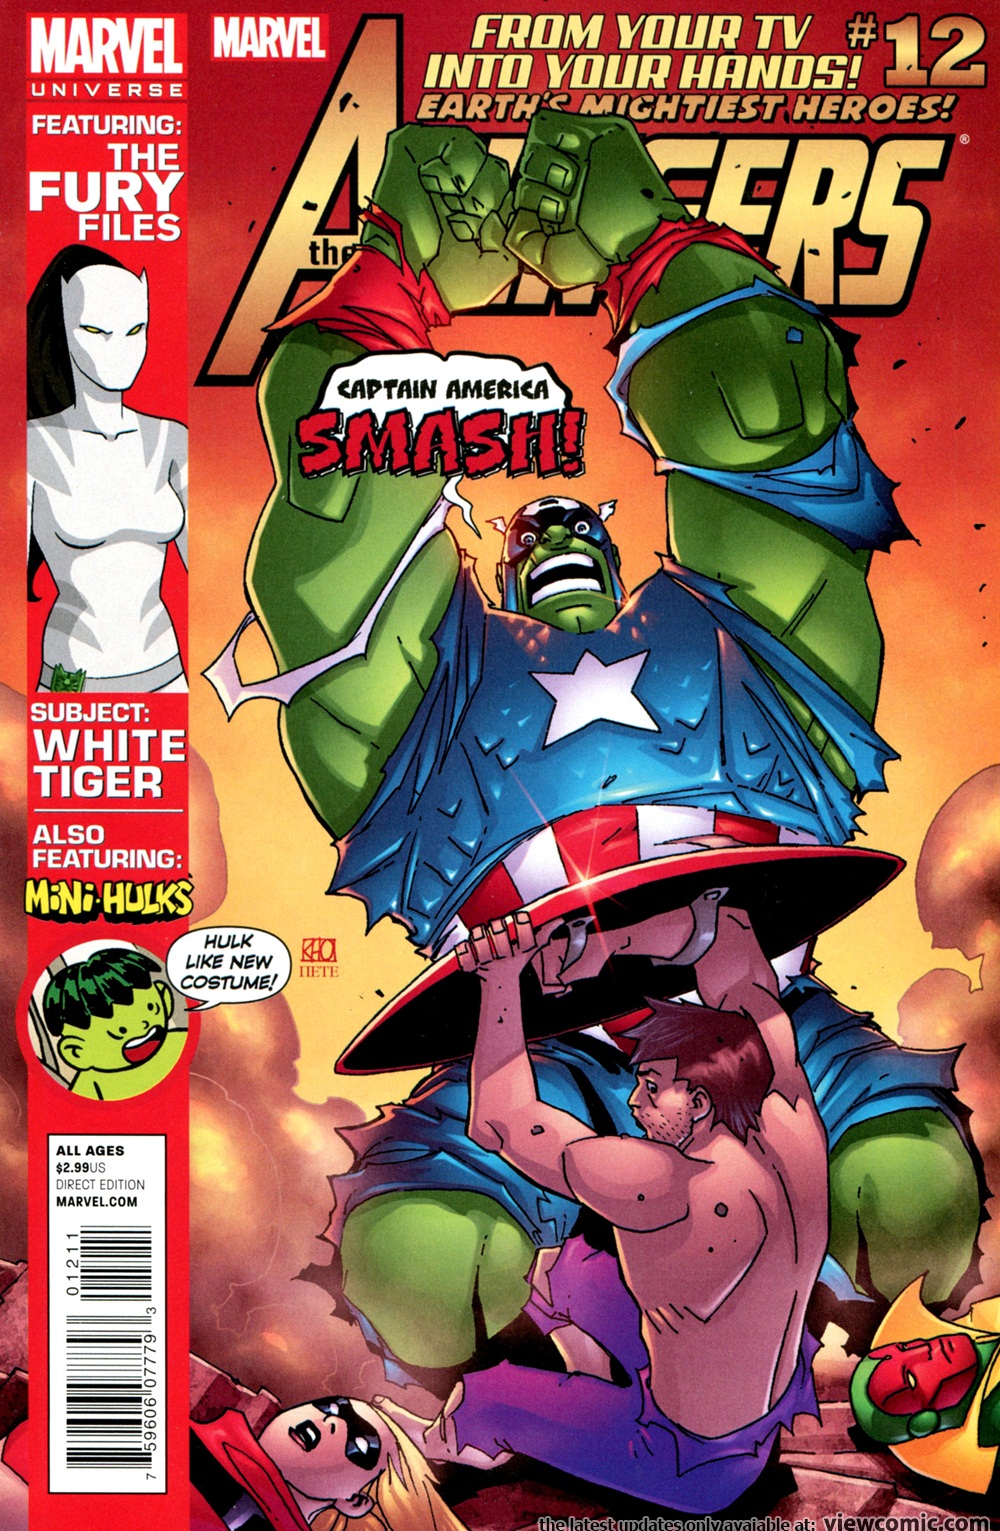 Marvel Universe Avengers Earths Mightiest Heroes 012 2013 | Read Marvel  Universe Avengers Earths Mightiest Heroes 012 2013 comic online in high  quality. Read Full Comic online for free - Read comics online in high  quality .